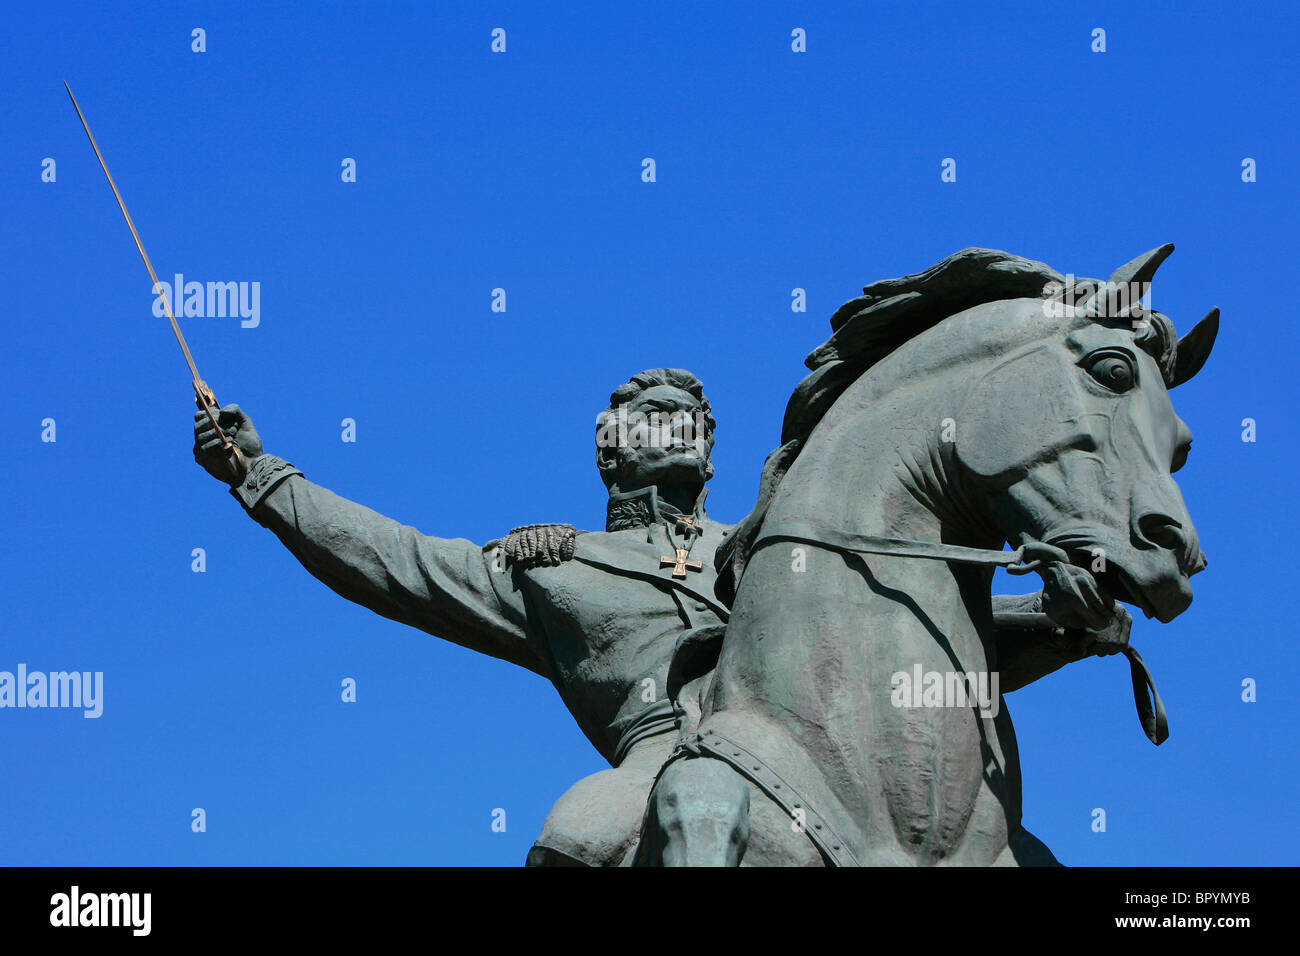 Statue of Prince Pyotr Ivanovich Bagration (1765-1812) in Moscow, Russia Stock Photo